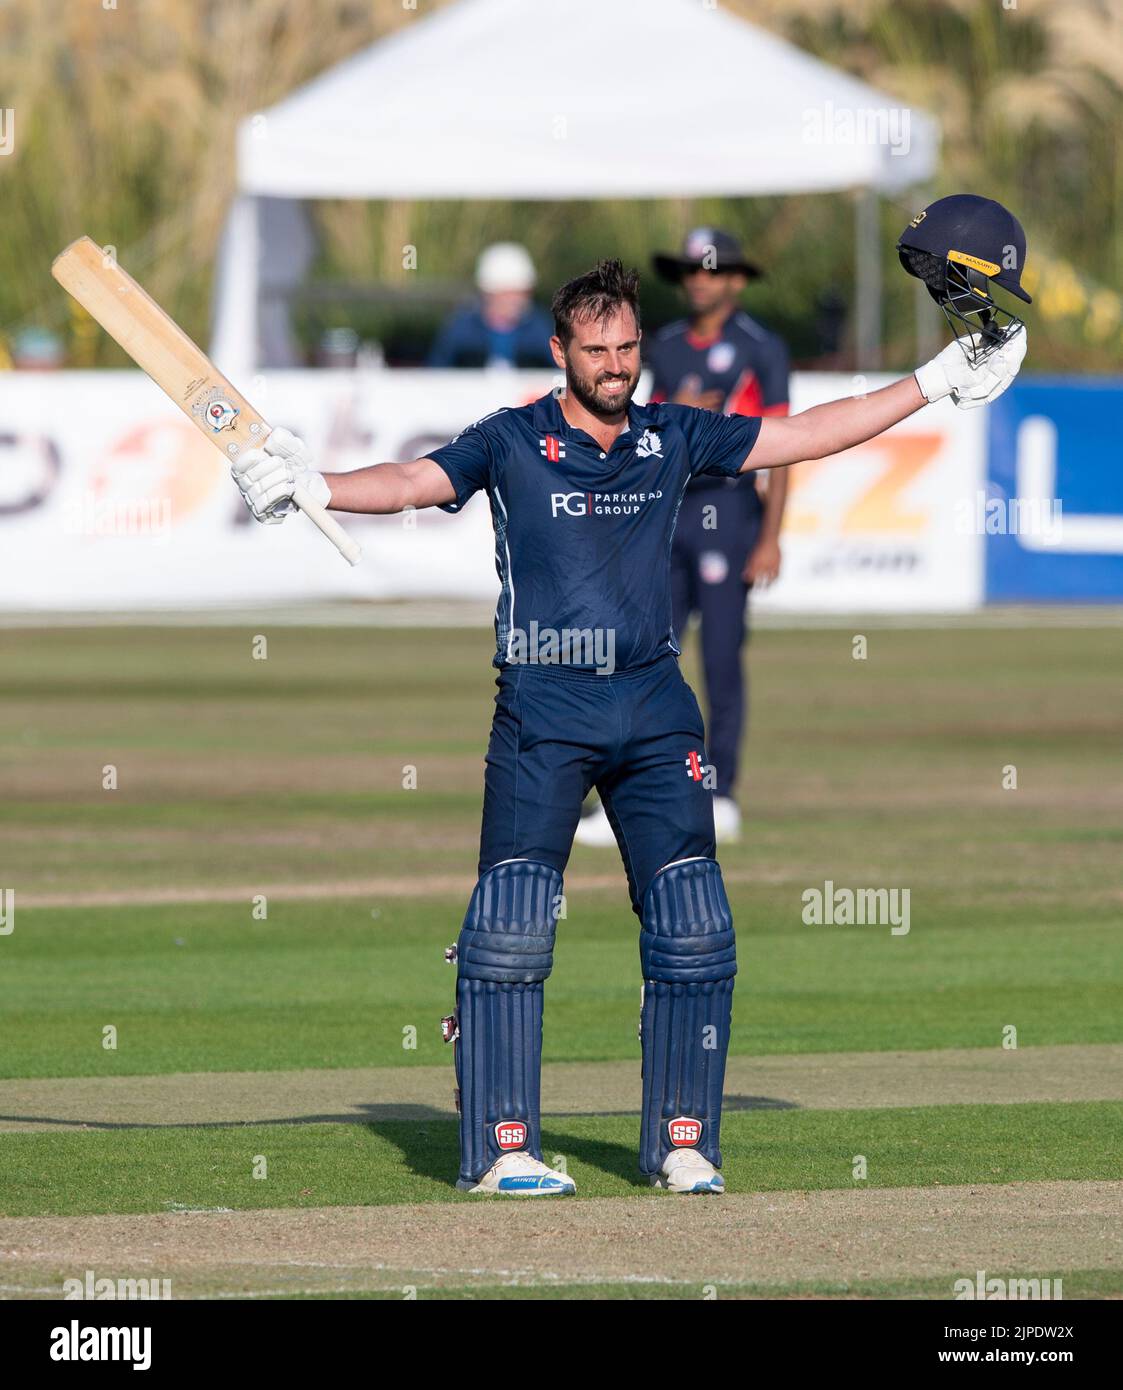 ICC Men's Cricket World Cup League 2 13/08/2022. Scotland take on the United States of America in the ICC Men's Cricket World Cup League 2 at Mannofie Stock Photo